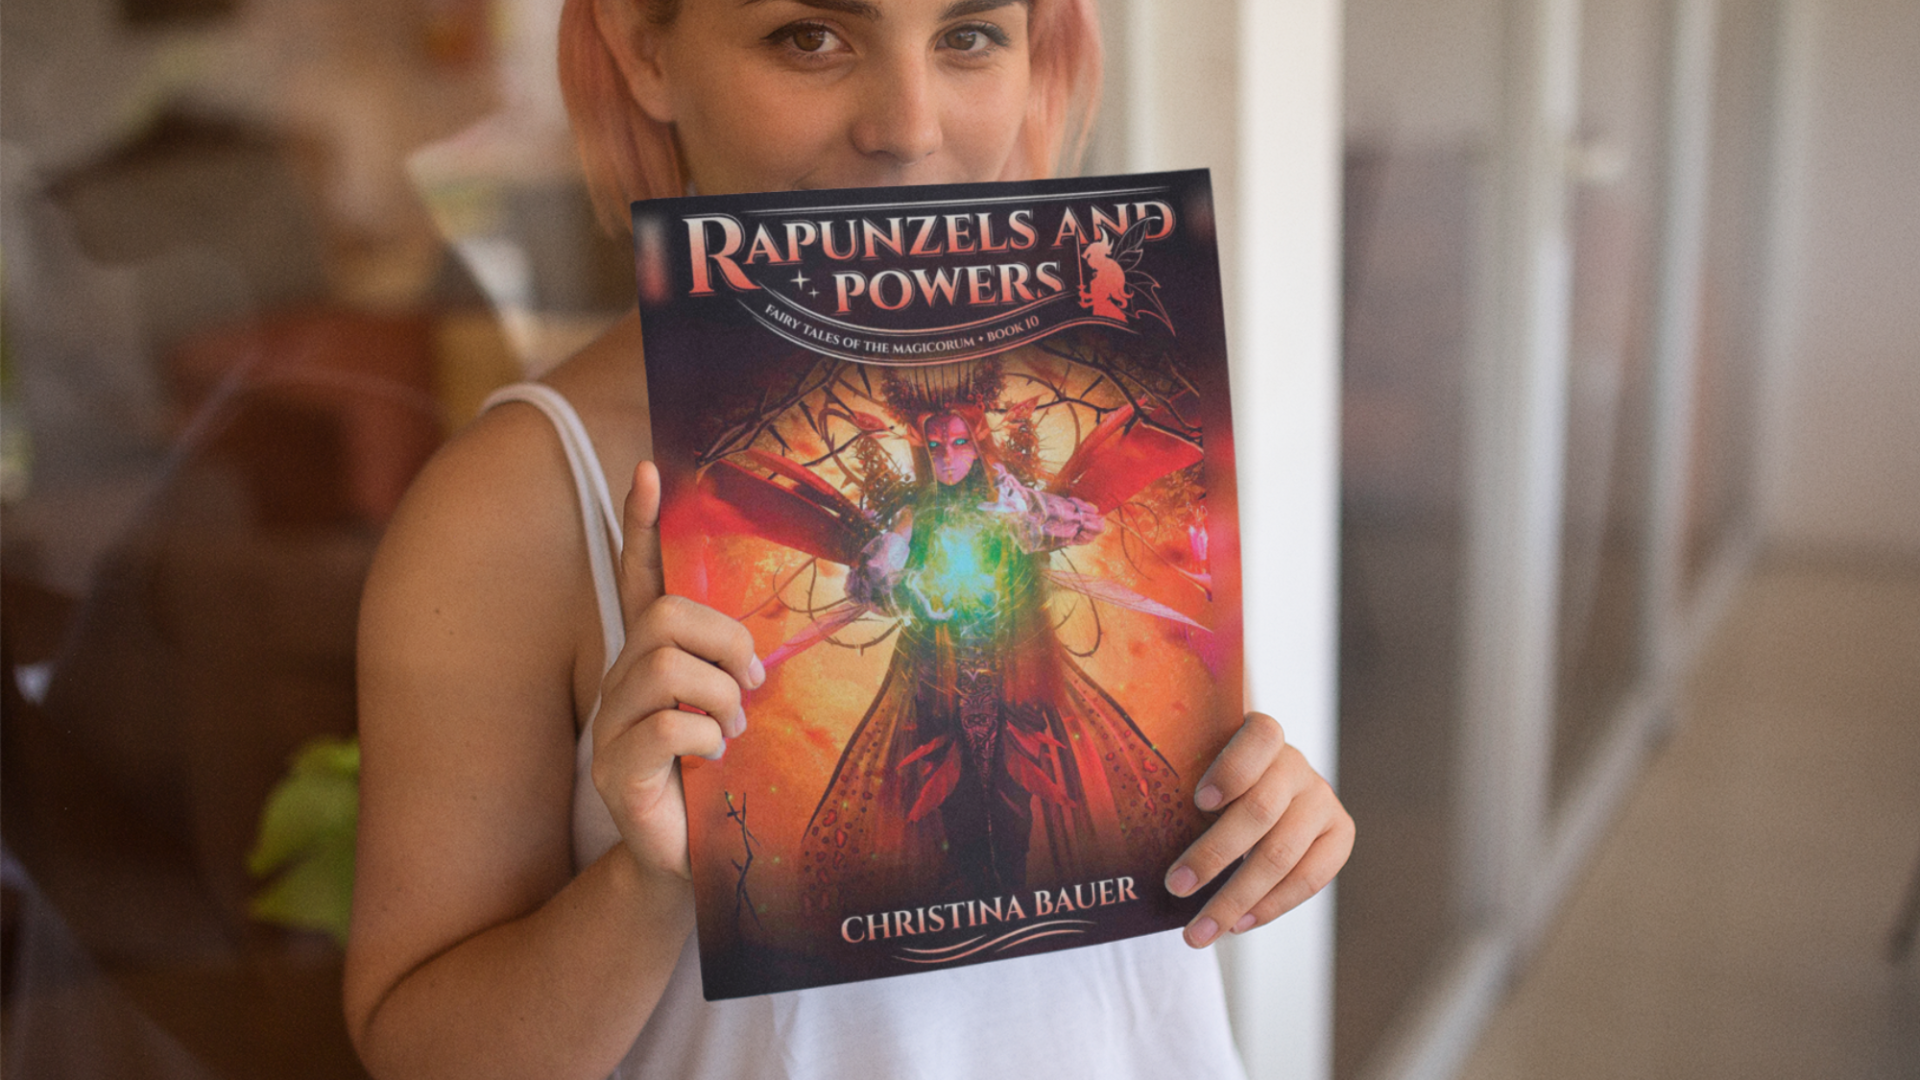 My new book, RAPUNZELS AND POWERS, is here!